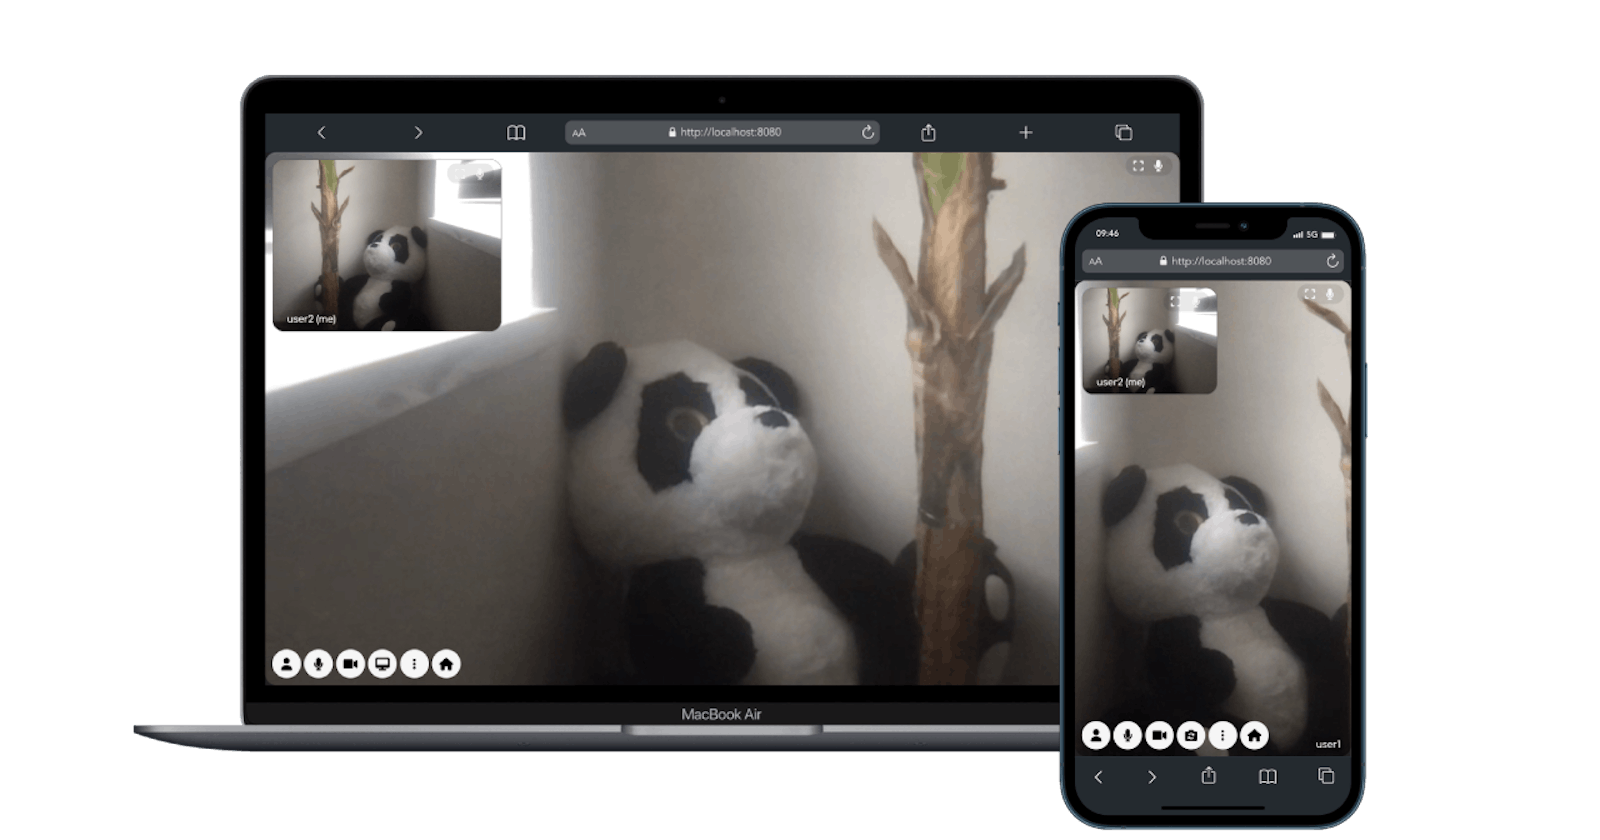 MiroTalk - WebRTC - C2C - Simple, Secure, Fast, Real-Time, Cam2Cam Video Conferences, compatible with all browsers and platforms.